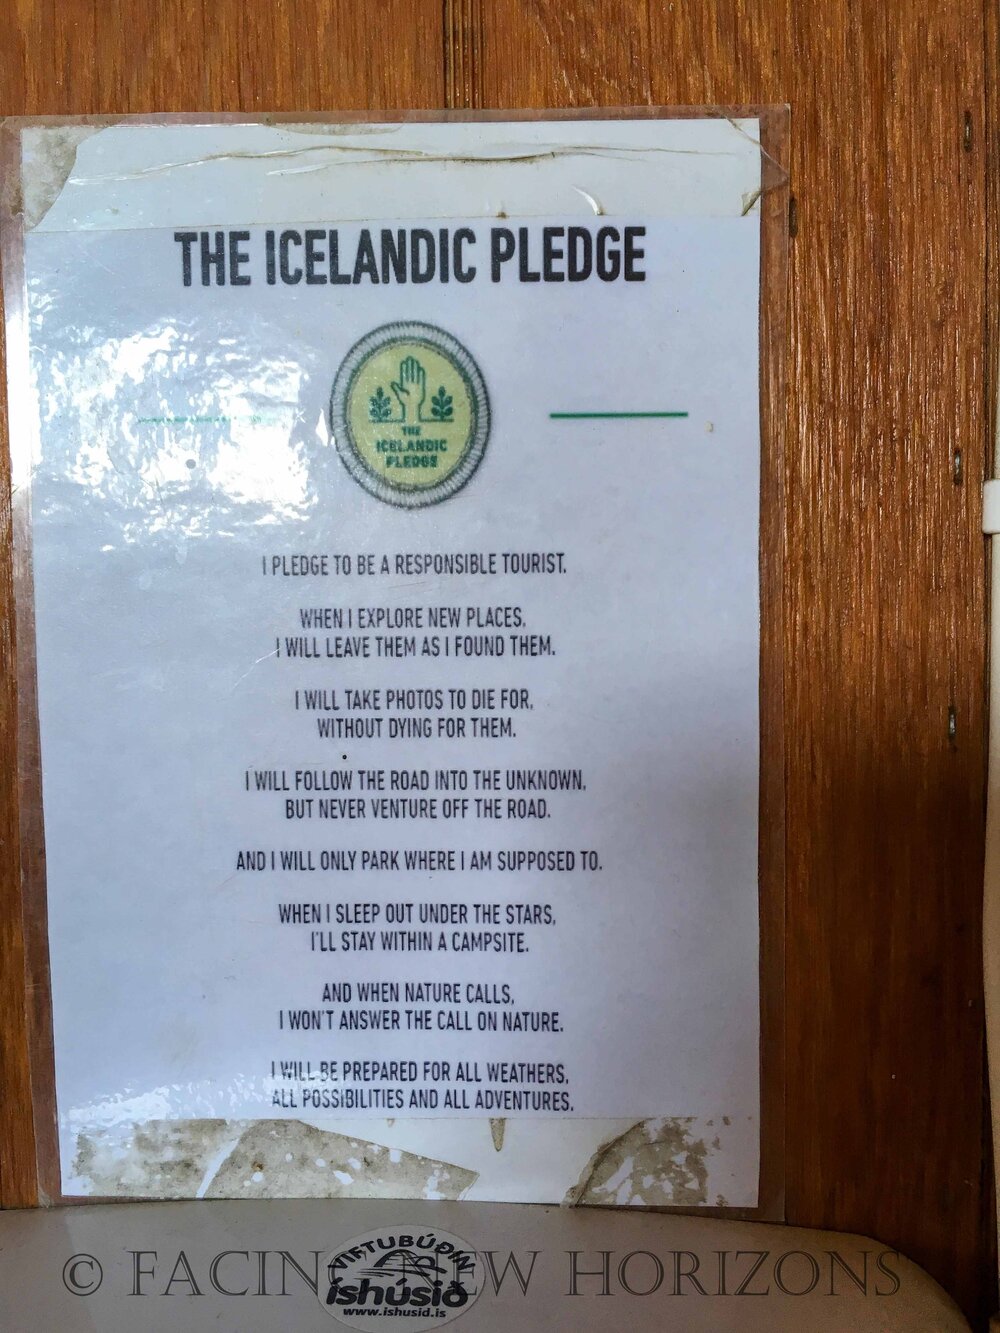  The Icelandic Pledge. Good rules to live by 